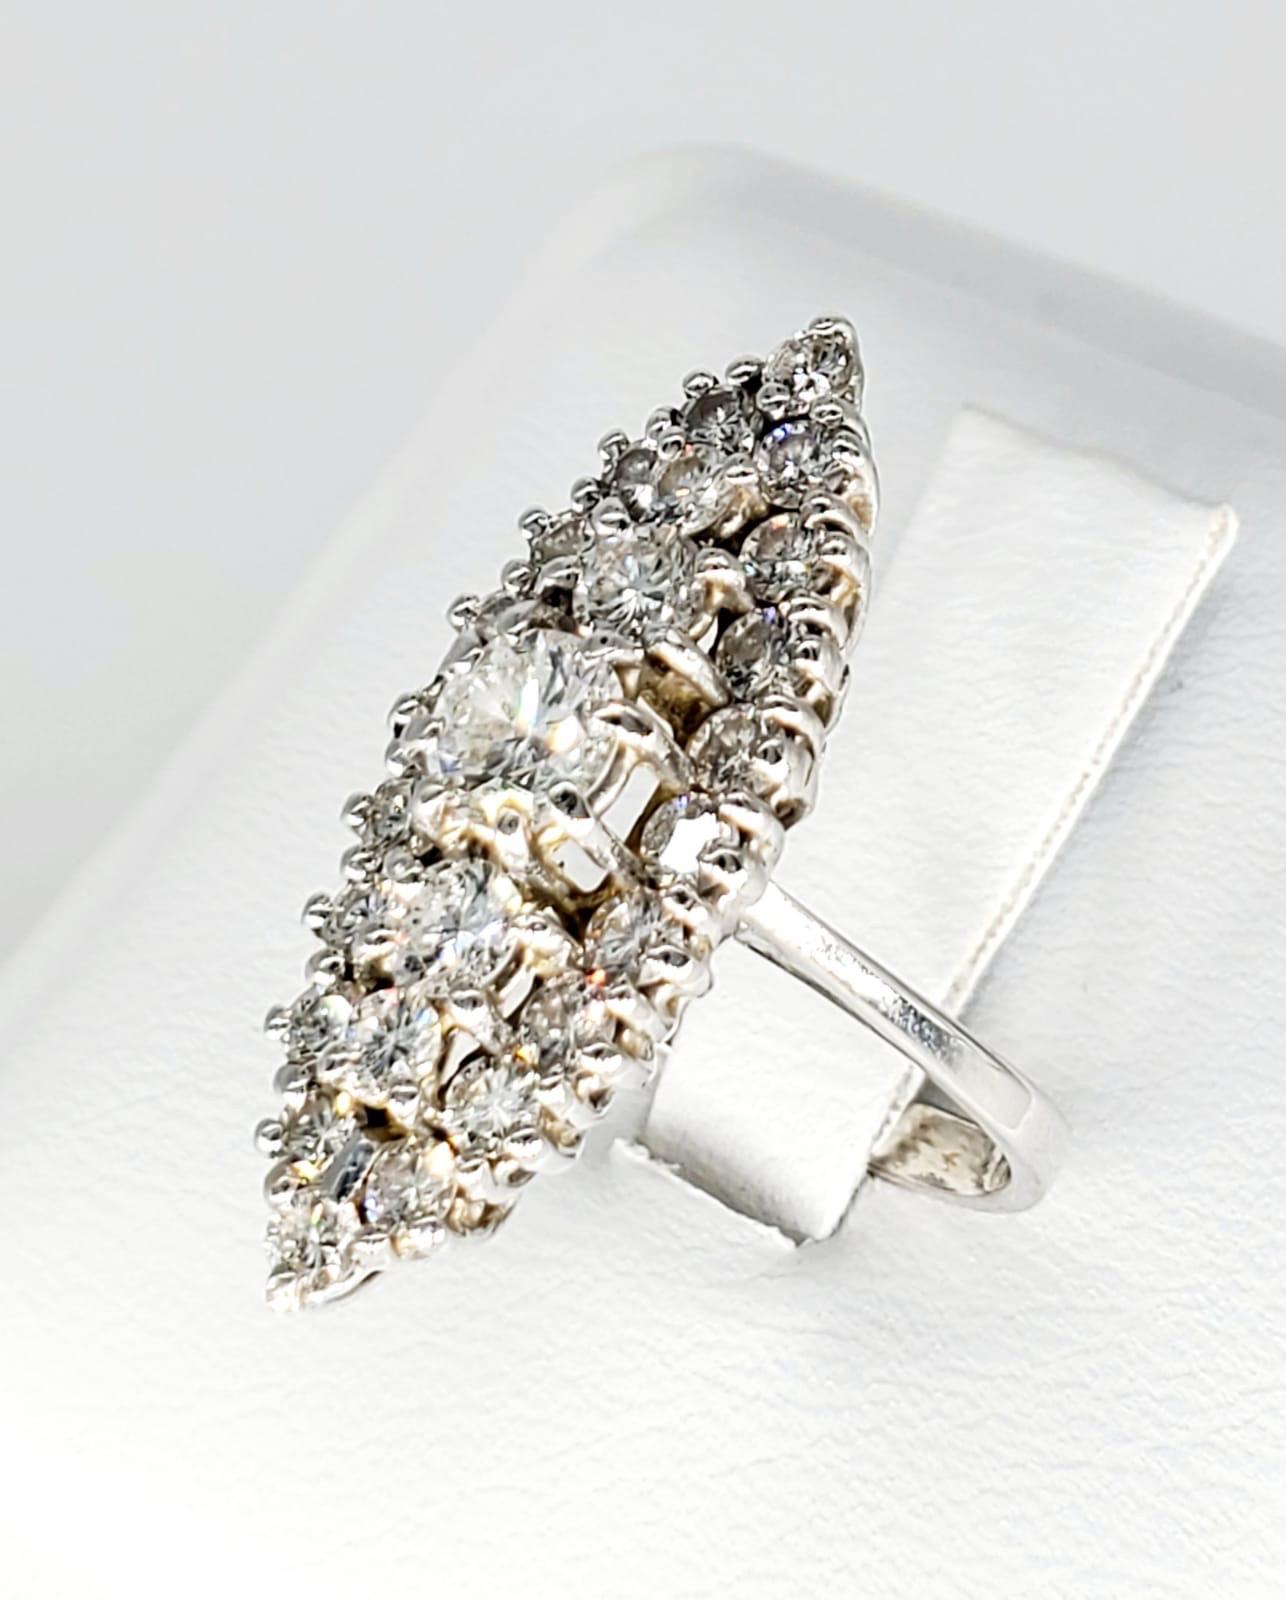 Vintage 2 Carats Diamonds Cluster Cocktail Ring 18k White Gold. The beauty in the ring is just unbelievable. The diamonds are VS clarity and very white. There is a total of 2 carats diamonds. 
Caution: you will fall in love with this ring!
Size: